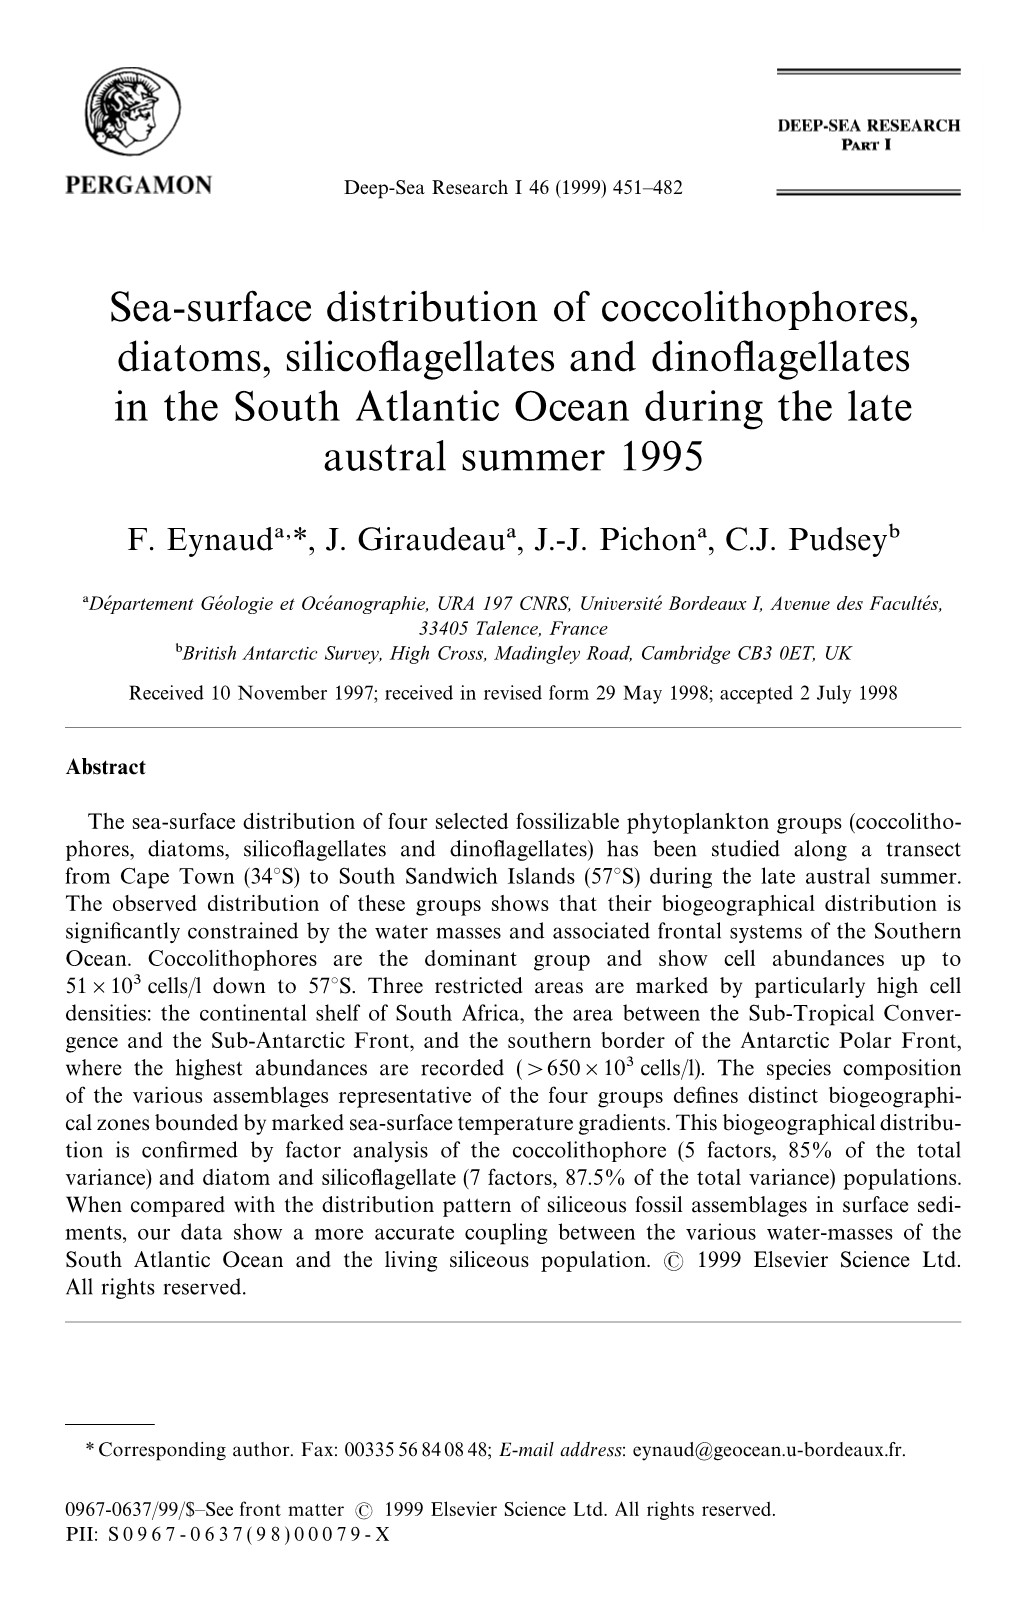 Sea-Surface Distribution of Coccolithophores, Diatoms, Silicoﬂagellates and Dinoﬂagellates in the South Atlantic Ocean During the Late Austral Summer 1995